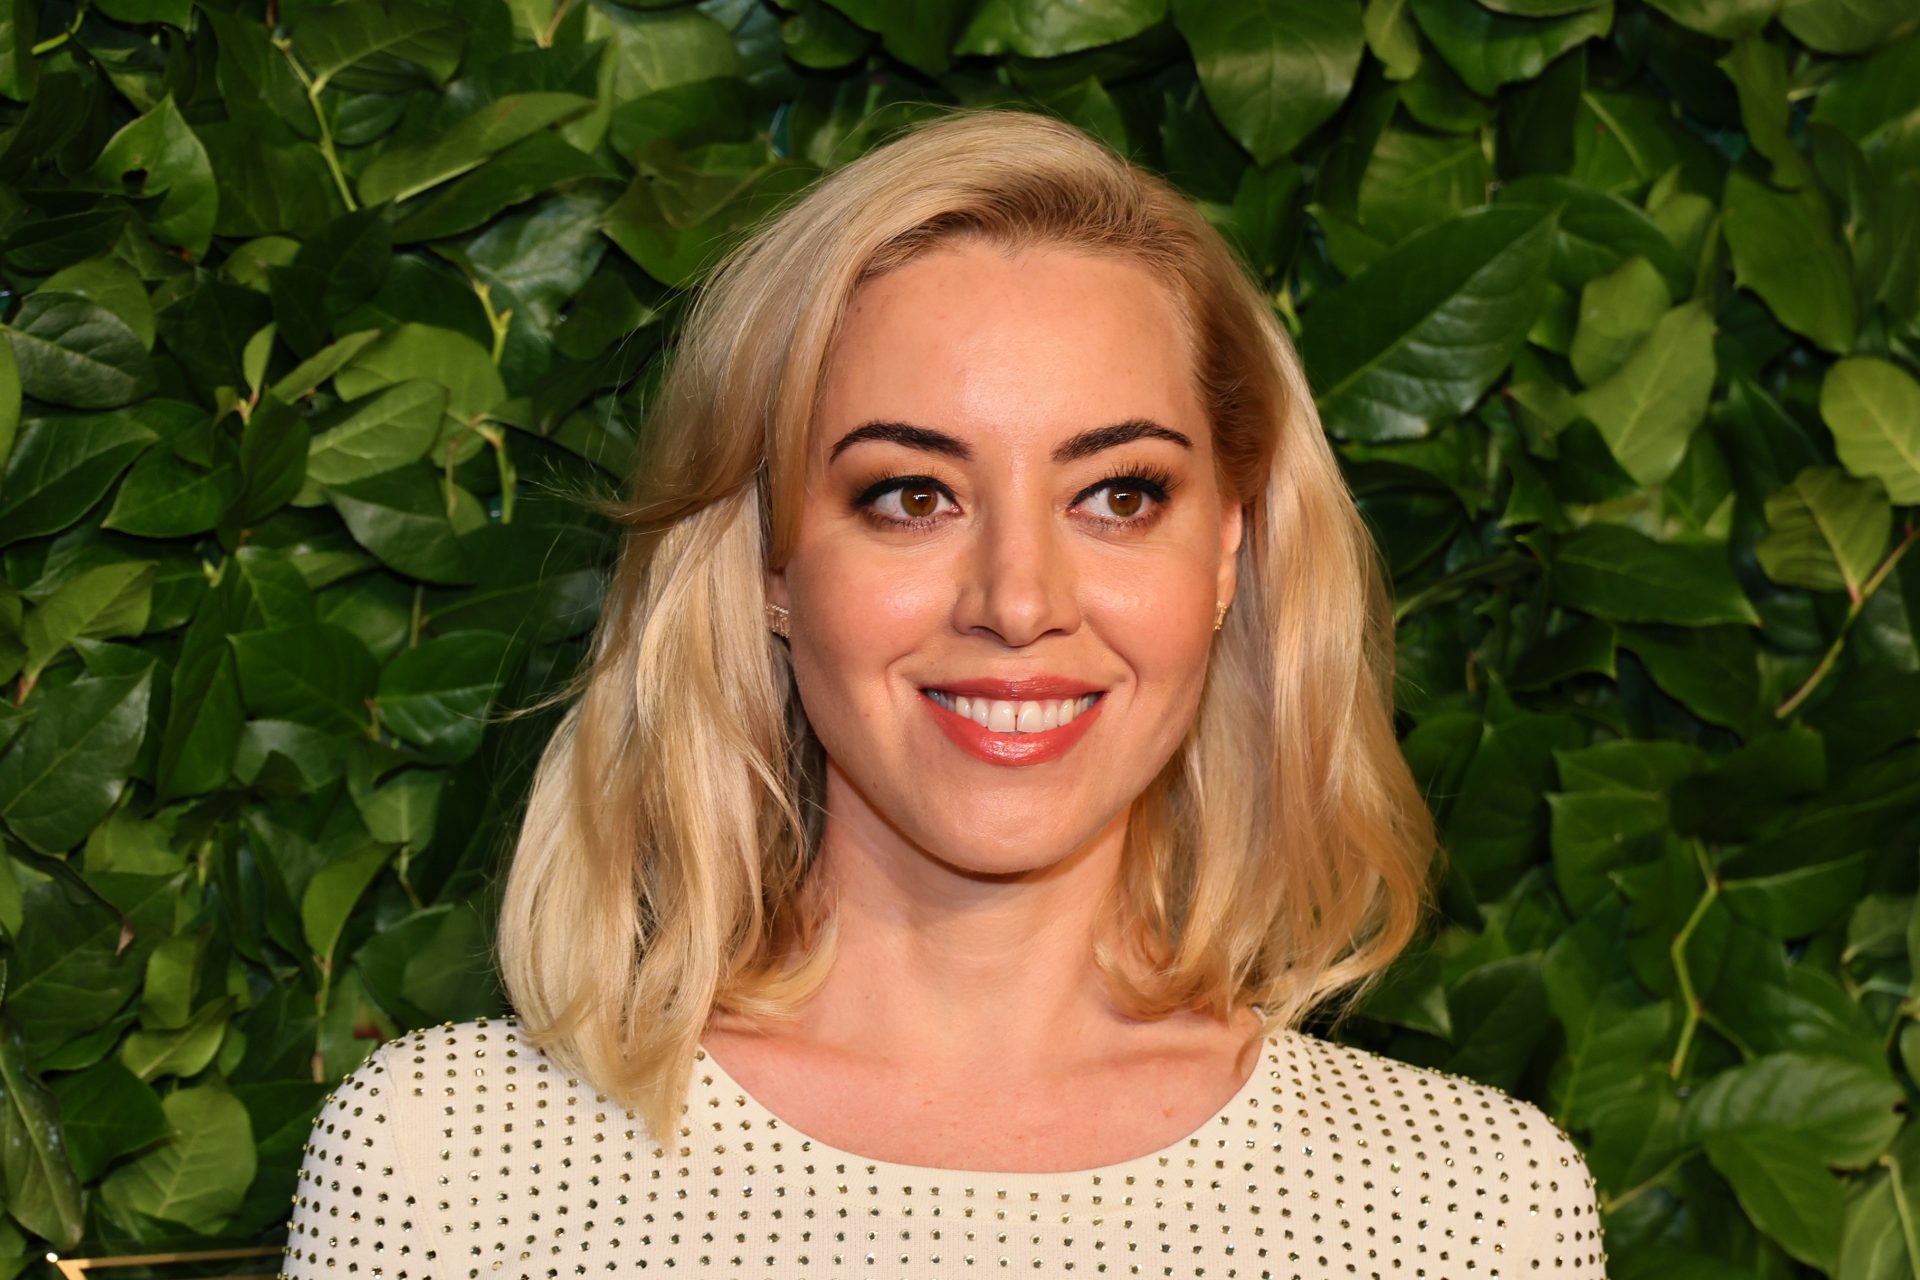 Aubrey Plaza: The White Lotus star's best comedic roles